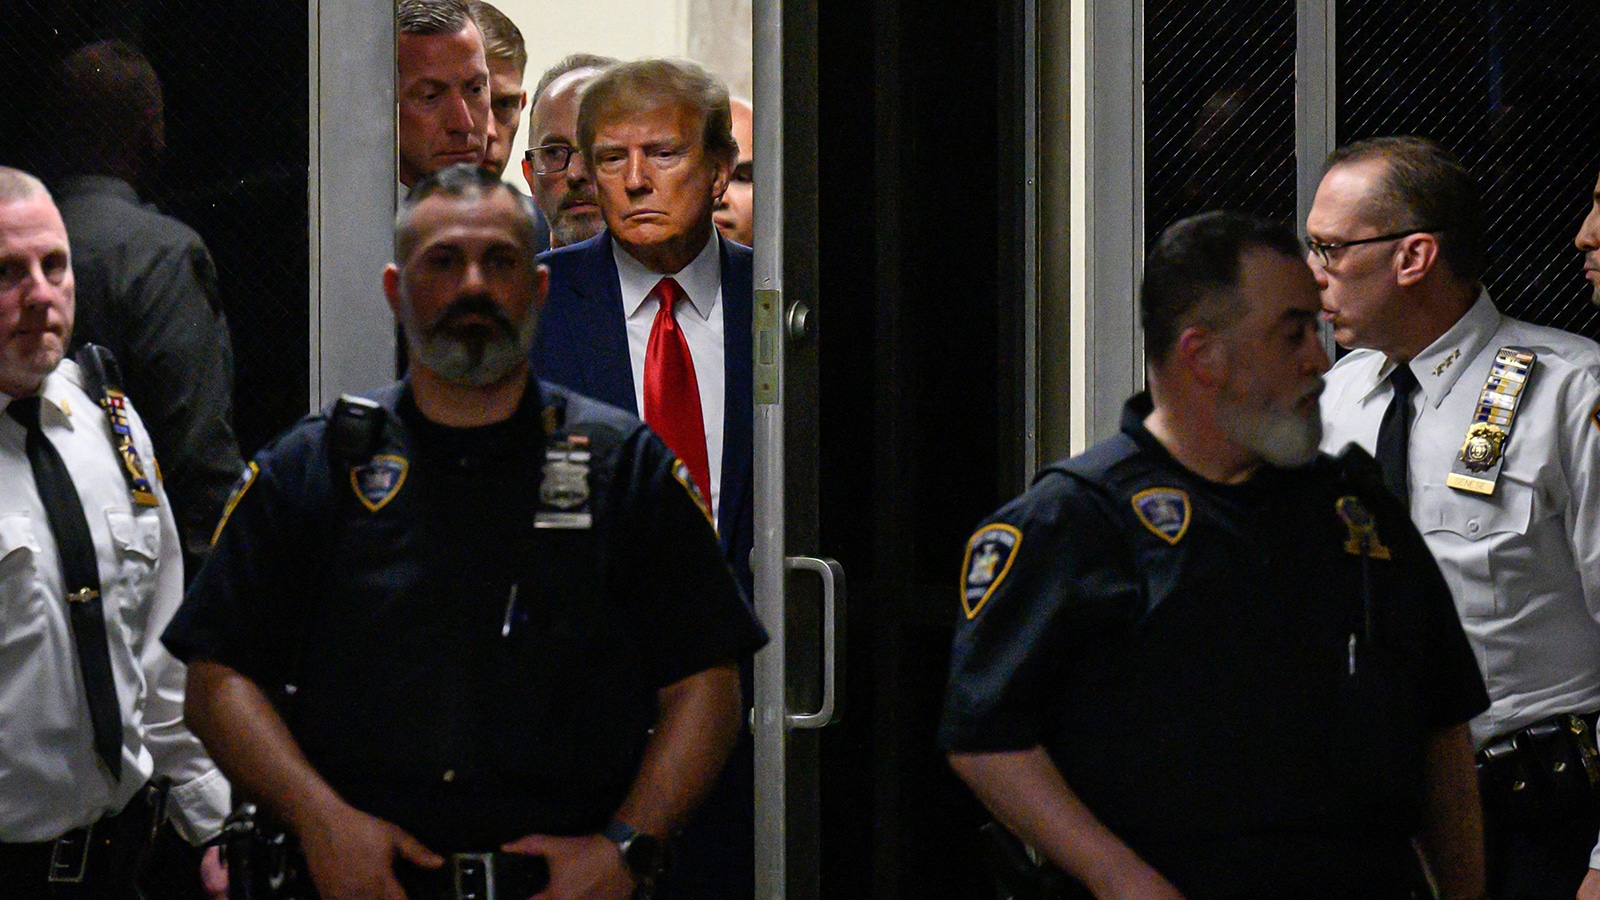 New York Police Officer Disrespects Trump In Courtroom